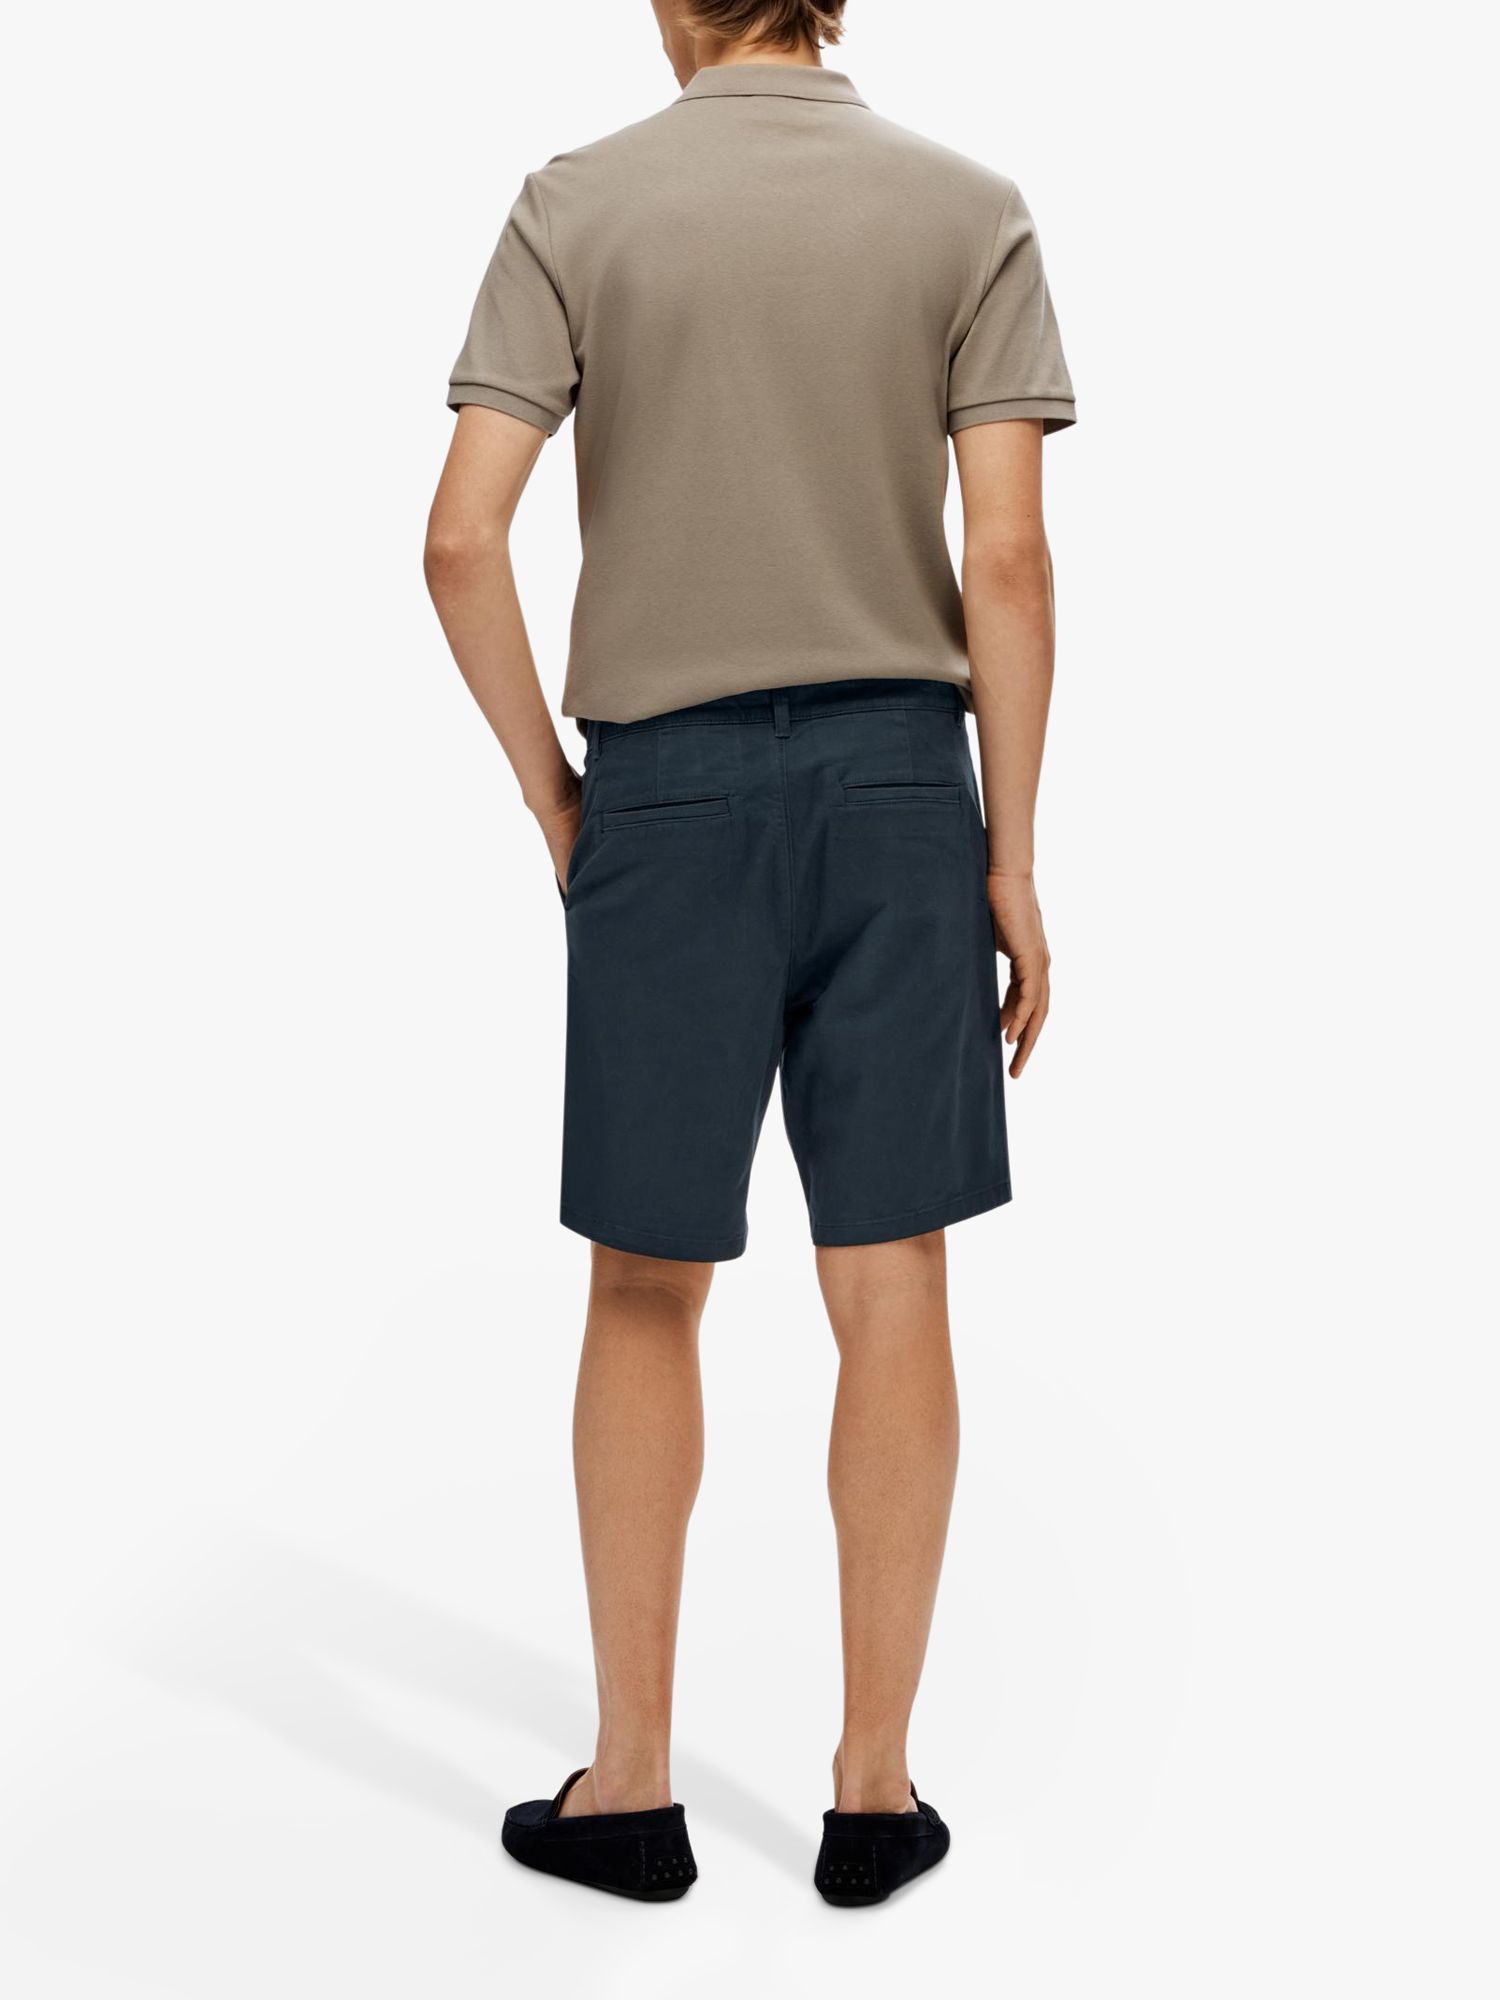 SELECTED HOMME Bill Chino Shorts, Dark Sapphire, S